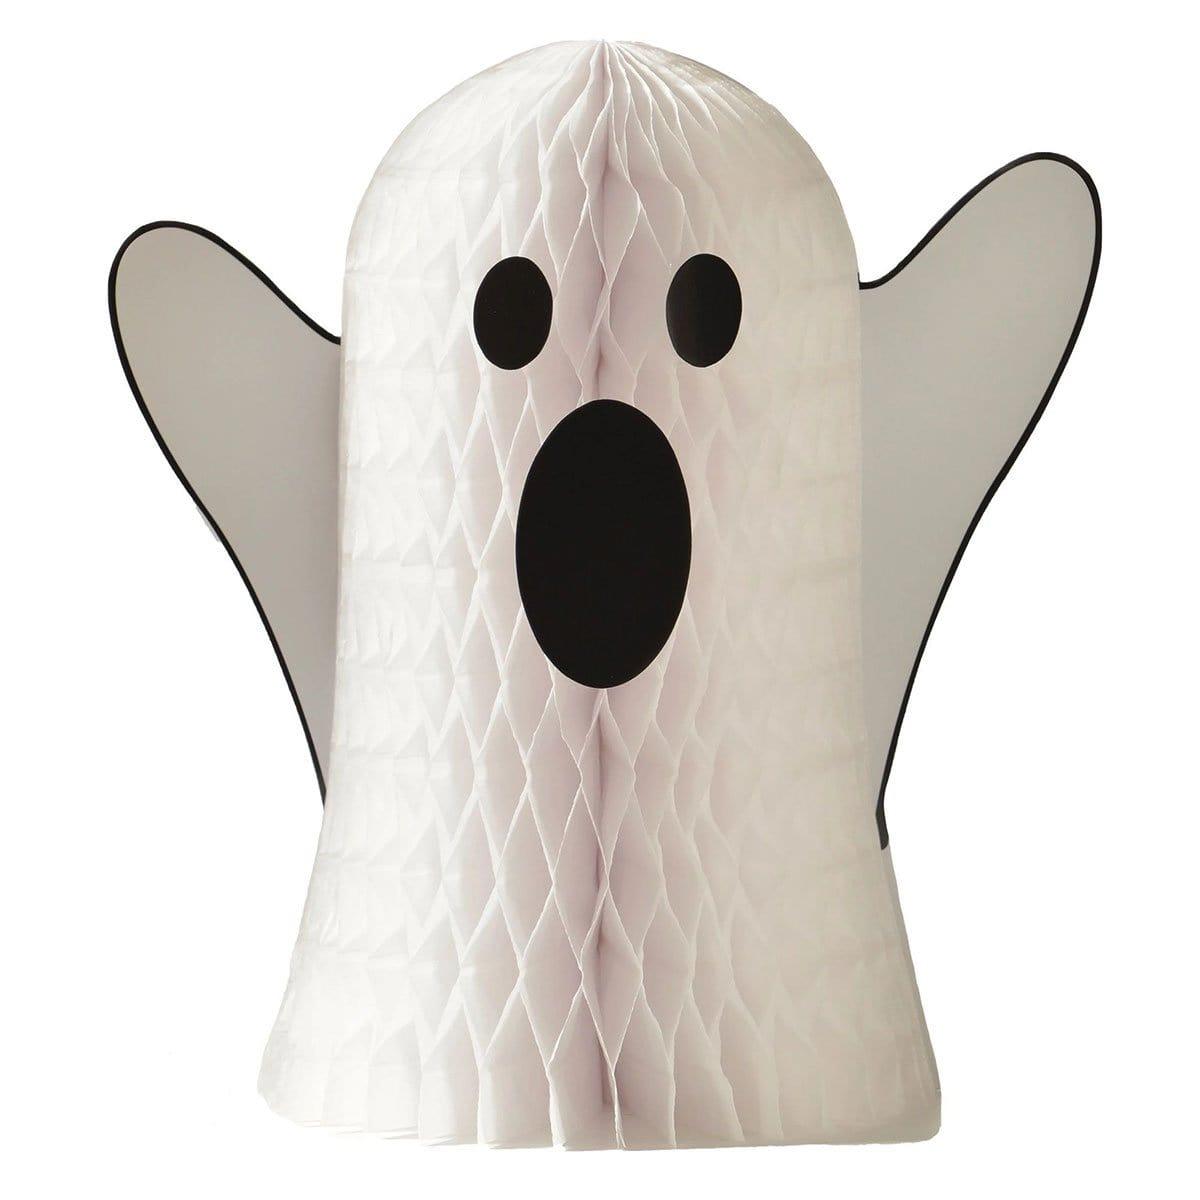 Buy Halloween Ghost Honeycomb Centerpiece sold at Party Expert